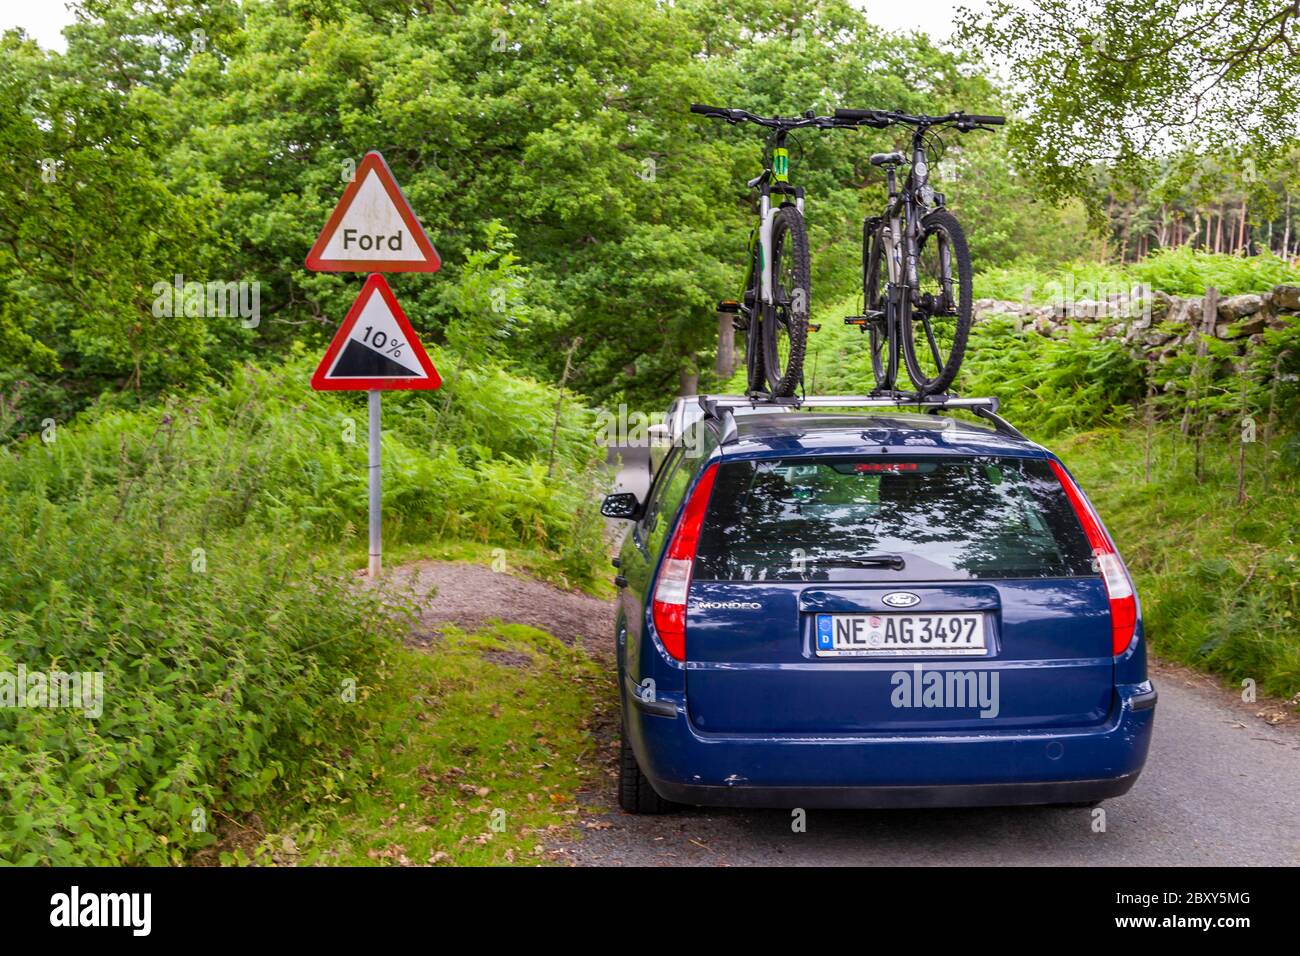 A Ford Mondeo with bicycles on the roof rack at a traffic sign 10 percent slope and ford Stock Photo